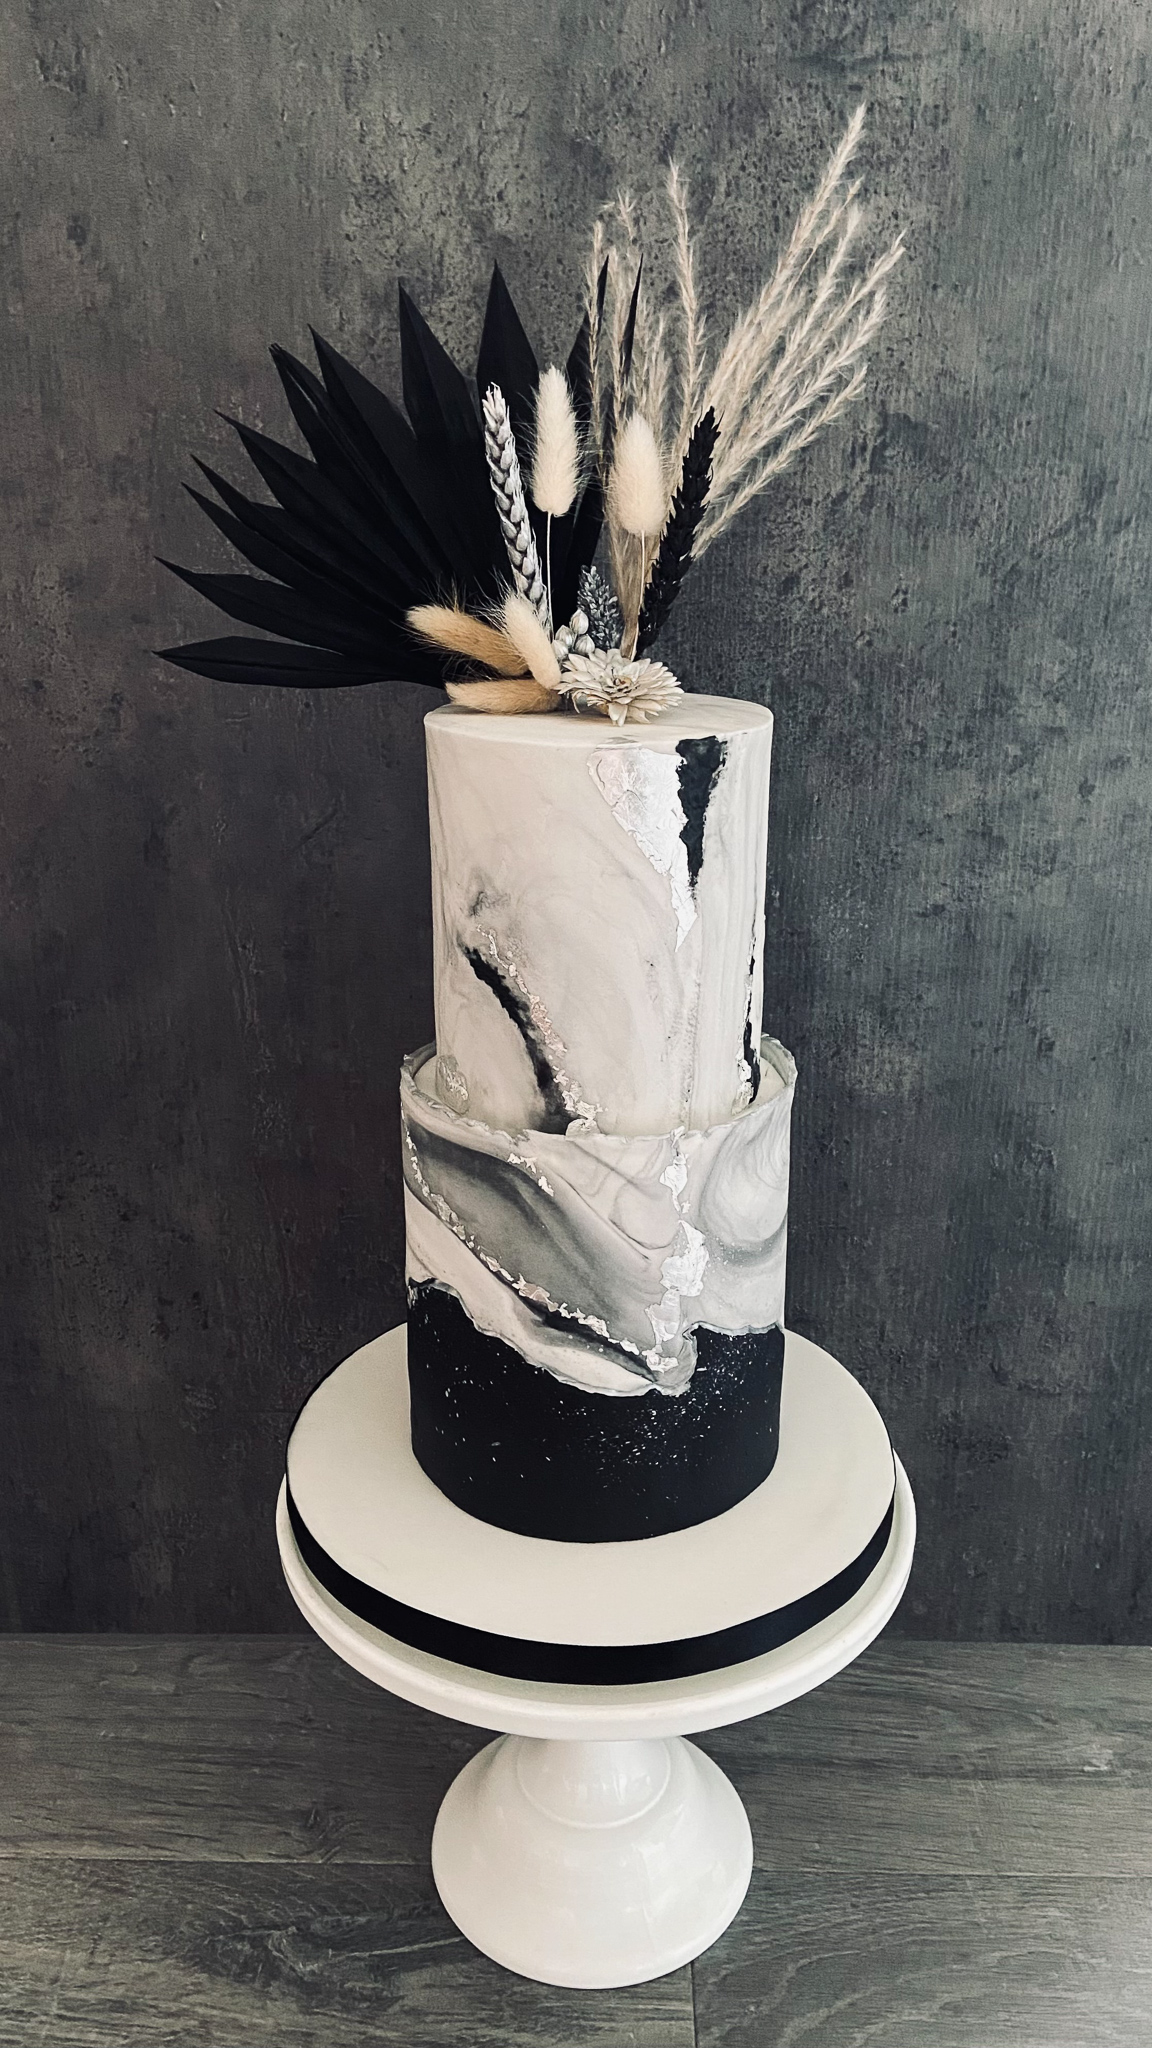 Stylish black and white textured marble cake with silver leaf and dried flowers